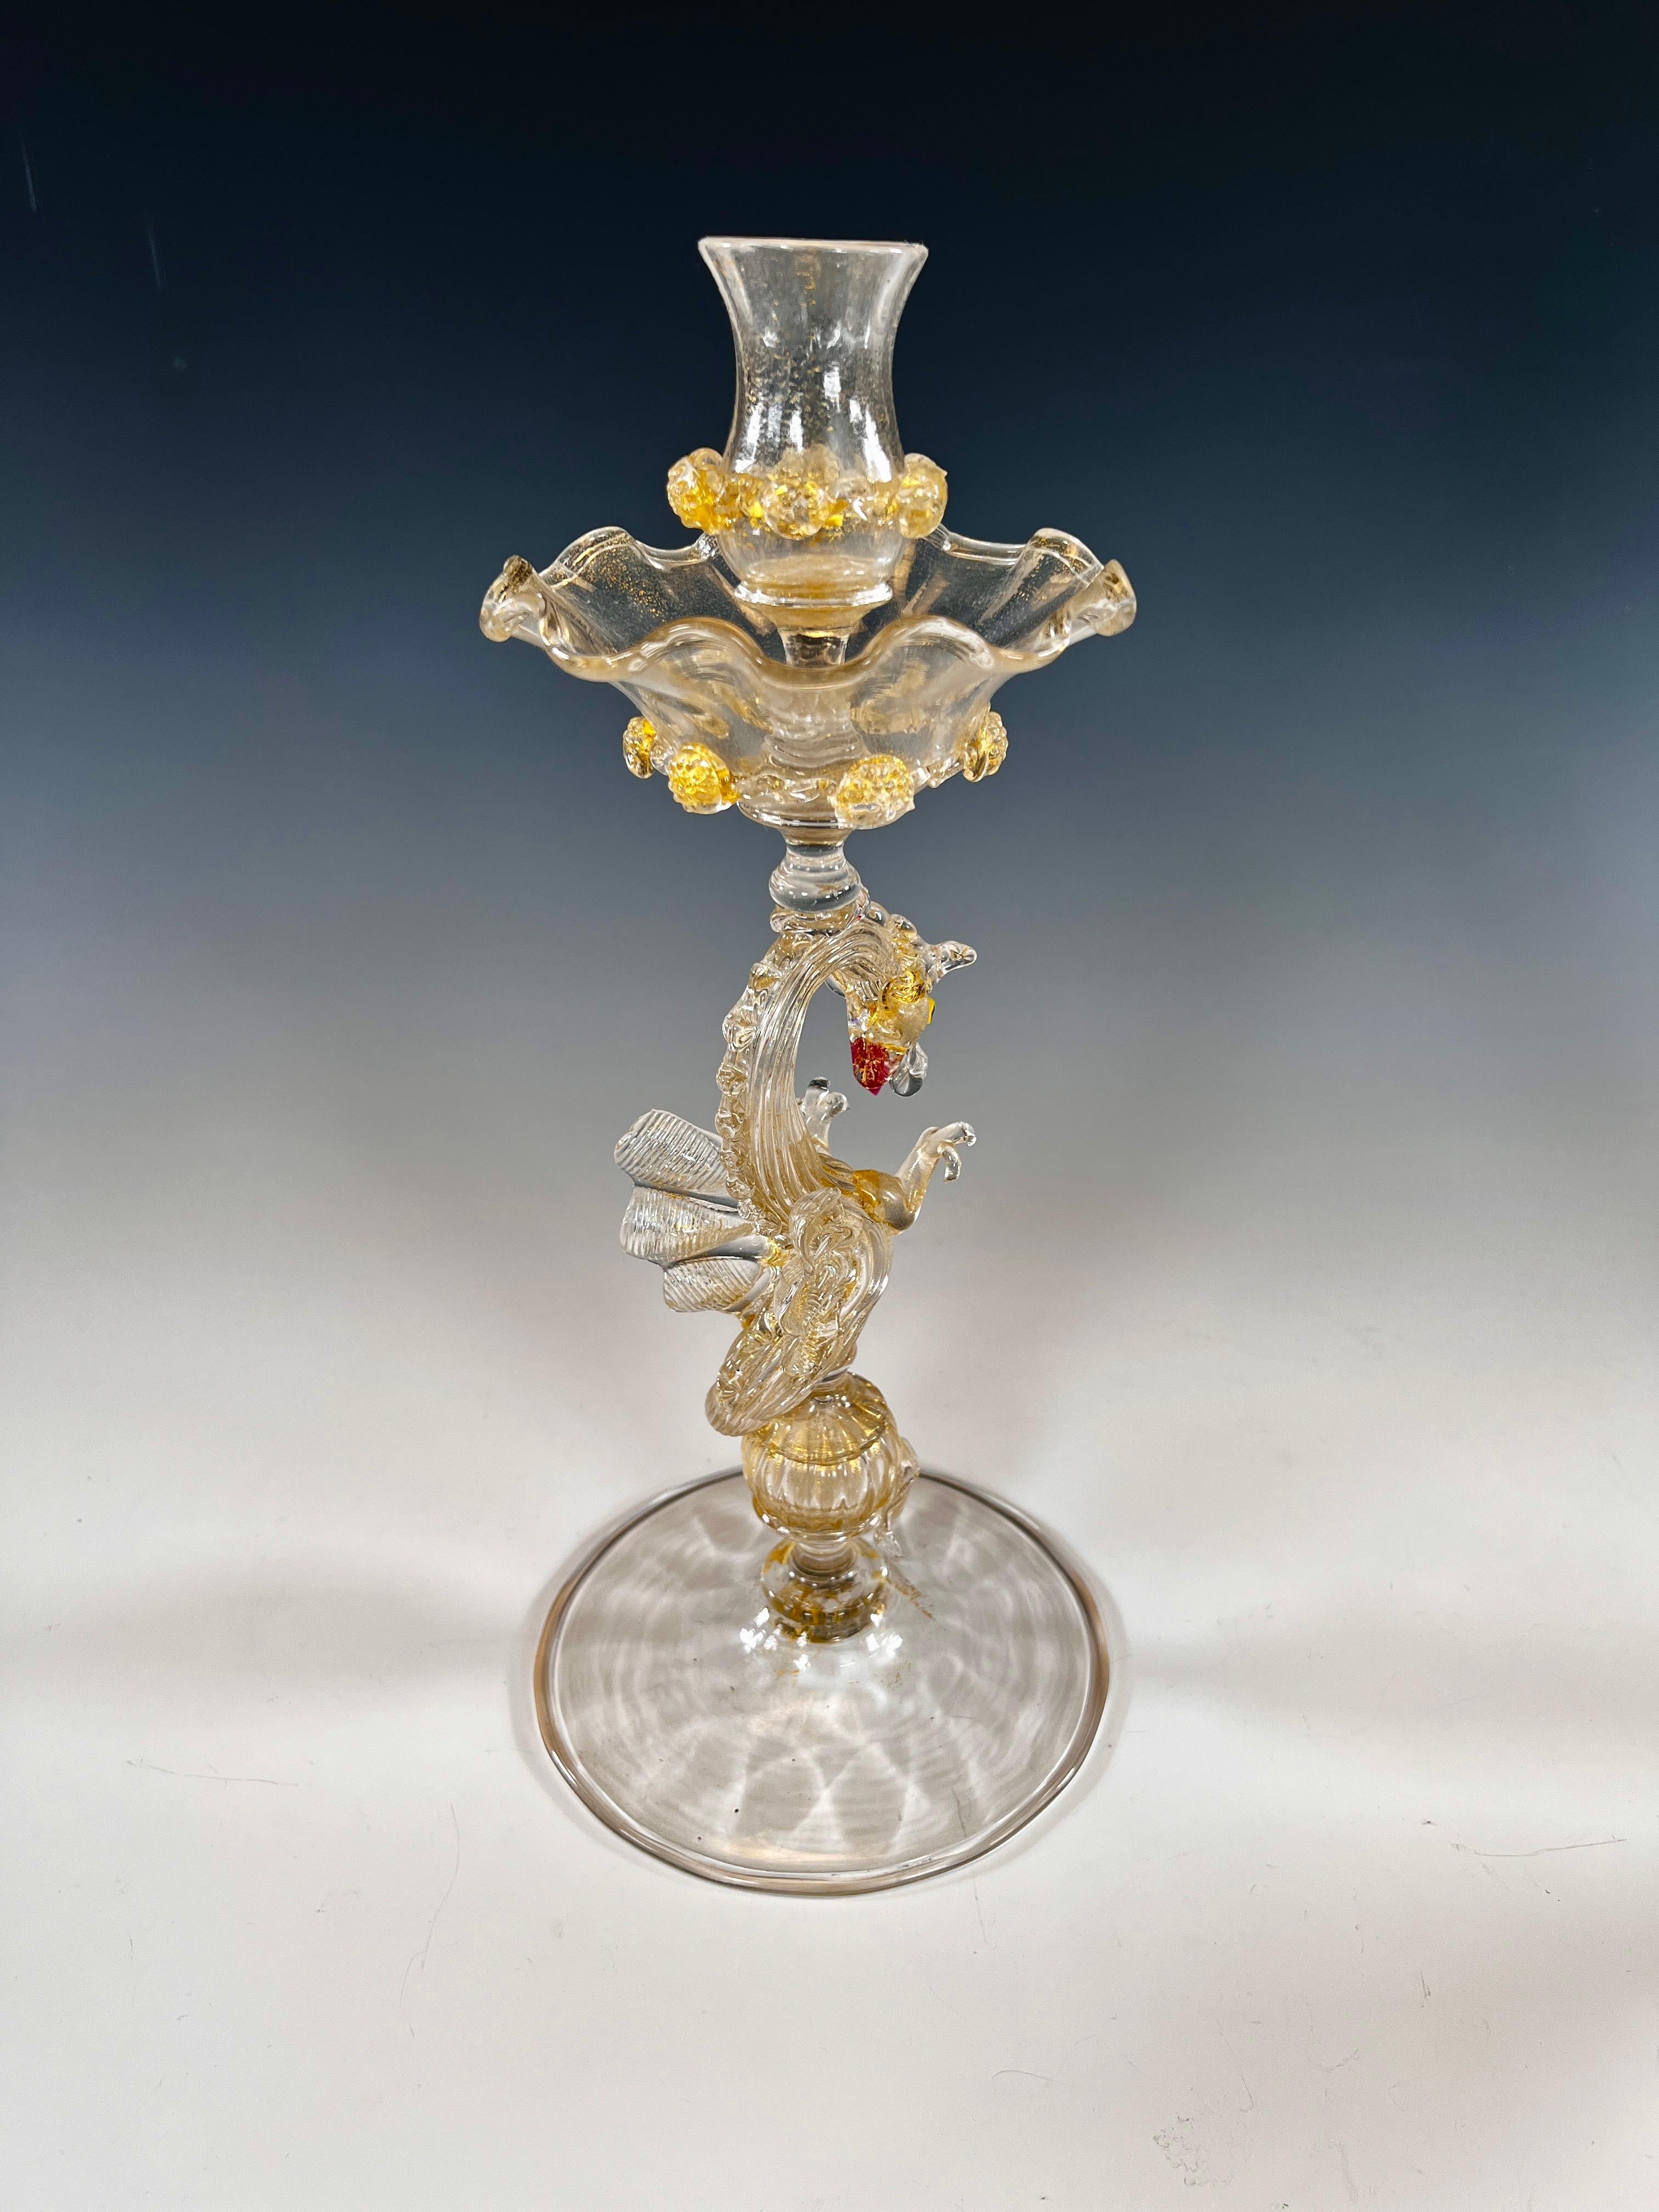 Pair of Venetian Salviati Hand Blown Dragon Candlesticks W/ Gold Leaf  In Good Condition For Sale In Great Barrington, MA